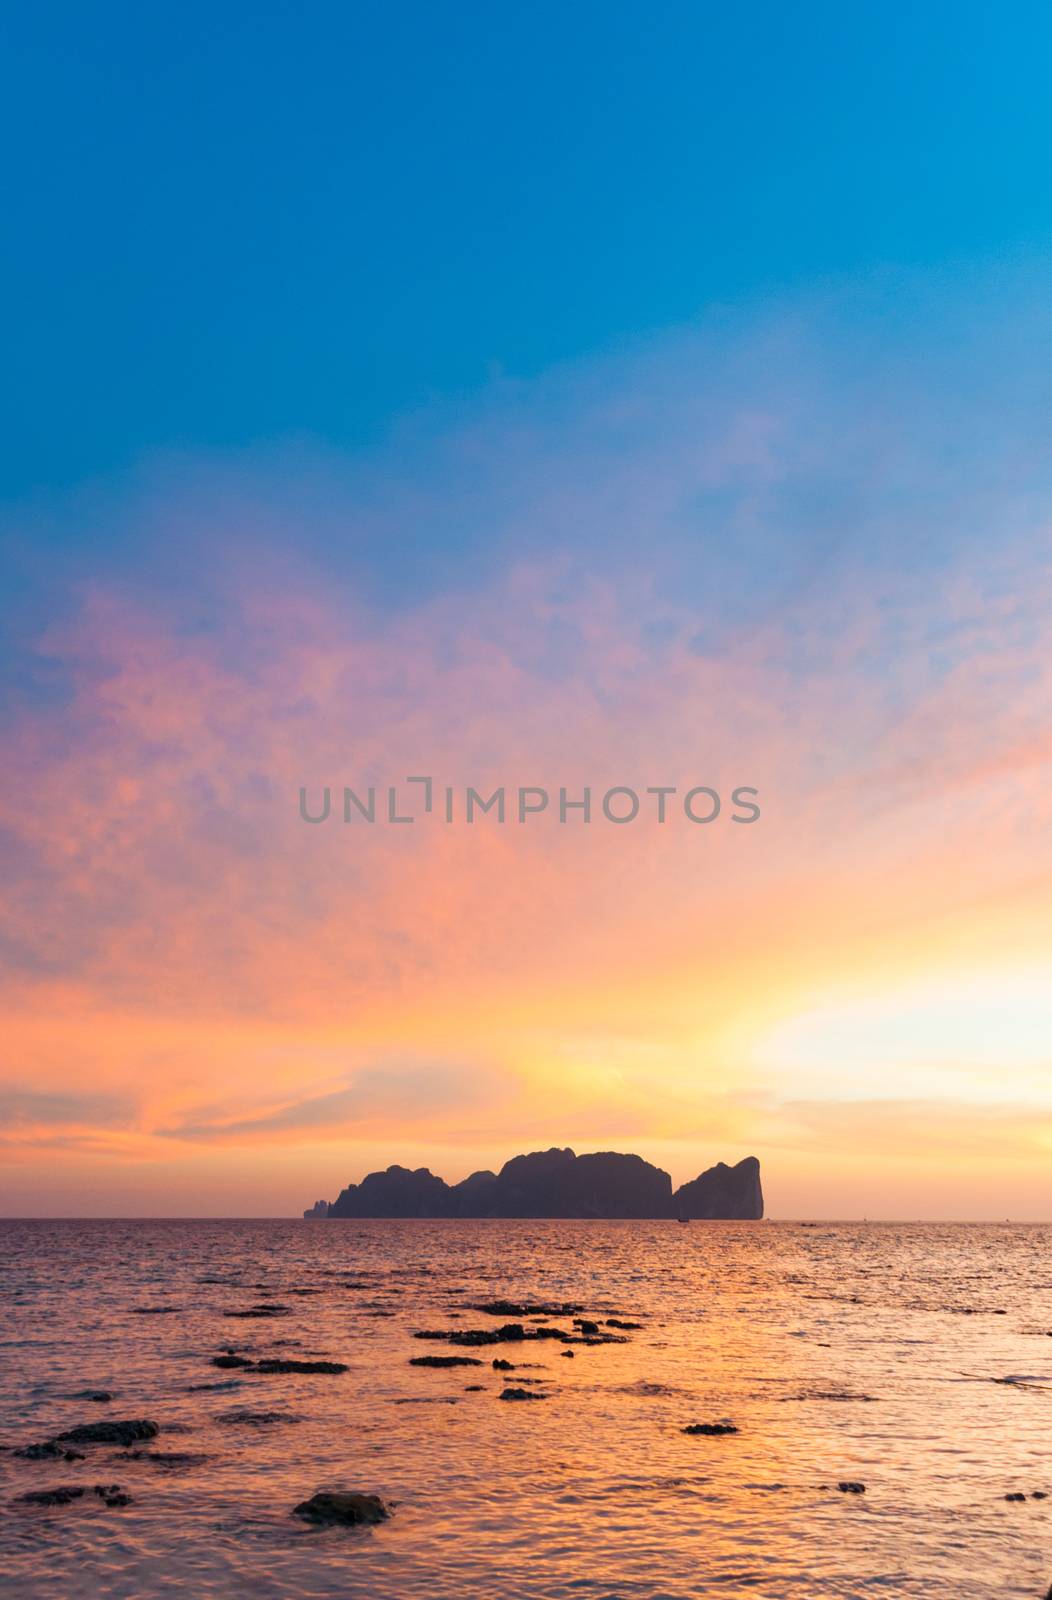 Phi-Phi Lee island in colorful romantic sunset. by kasto